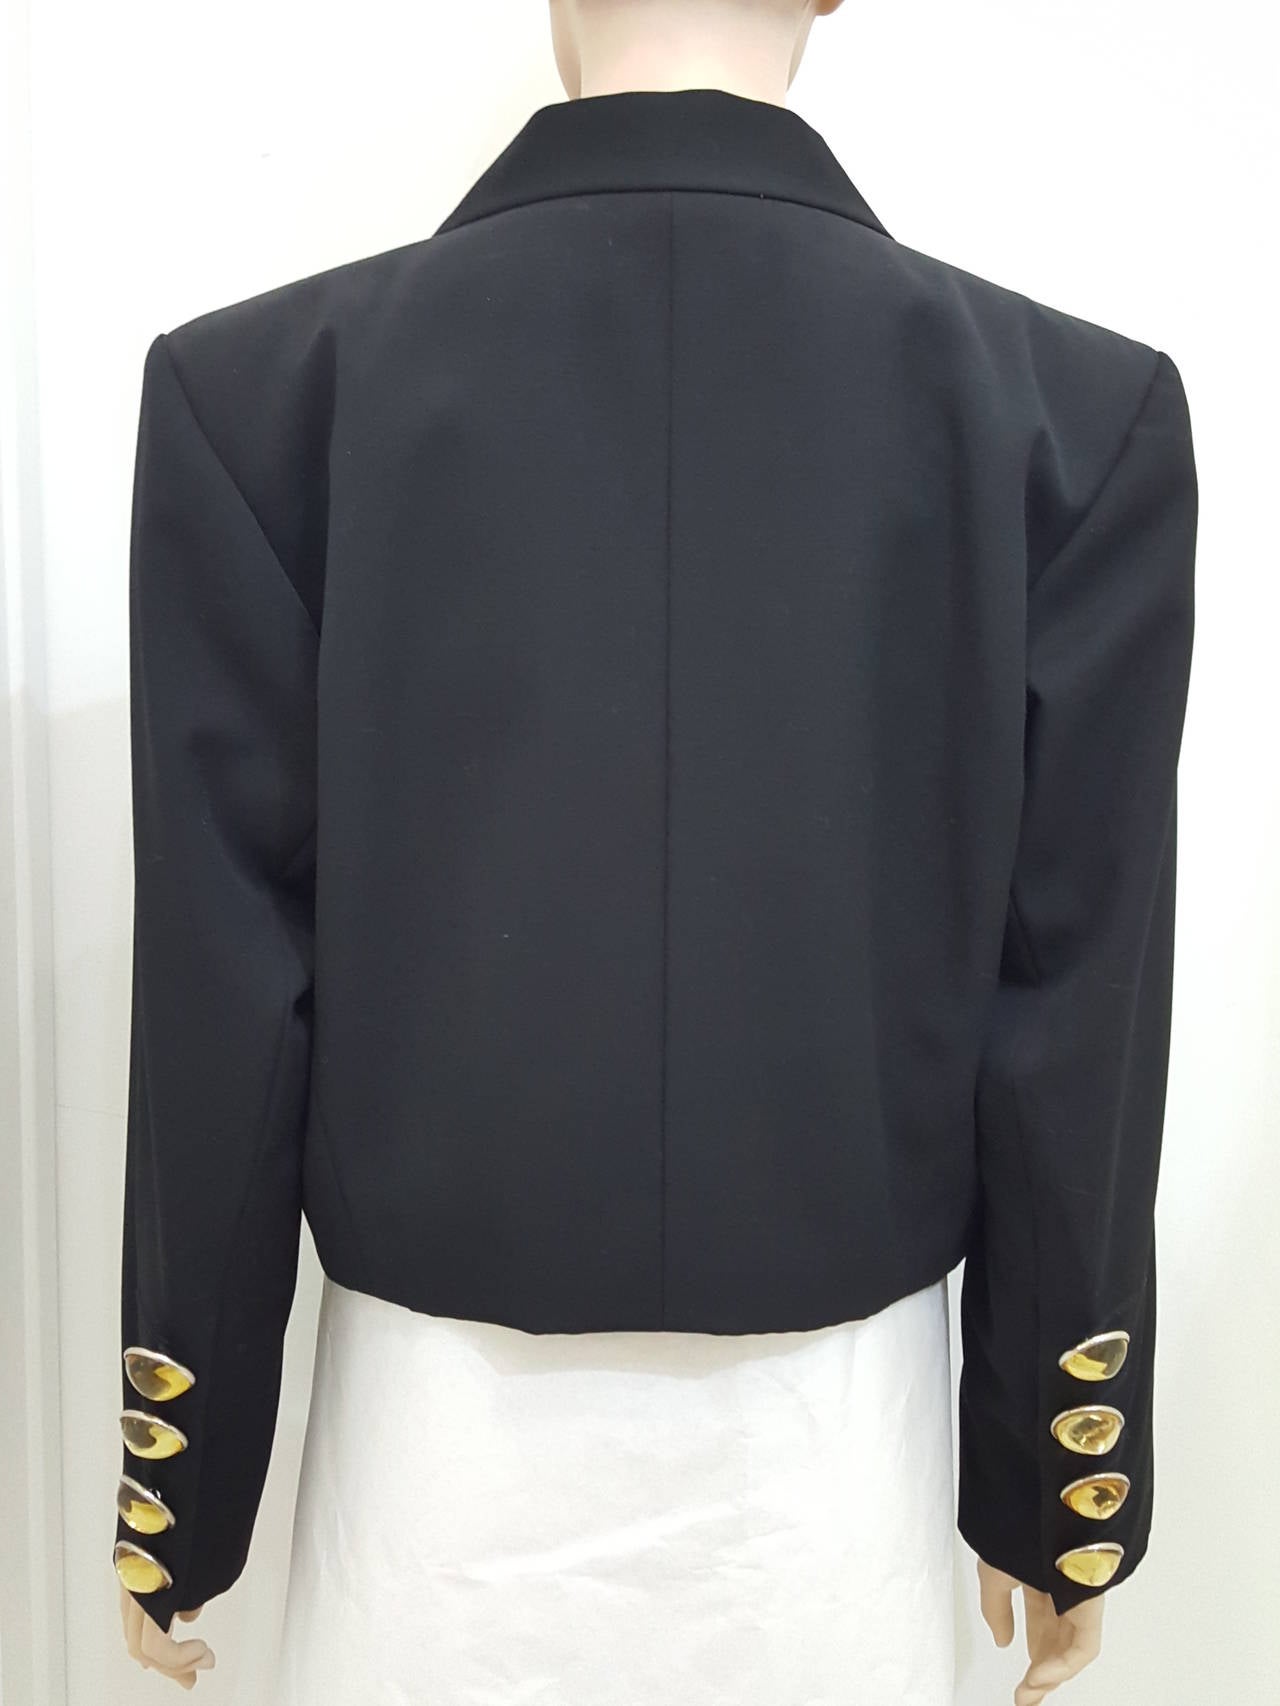 It is all about the buttons.  This fabulous vintage YSL Bolero jacket has great golden Lucite buttons down the rear of each arm.  It is from his Rive Gauche collection an is in fabulous condition. The black silk tuxedo  trim and the large buttons (1